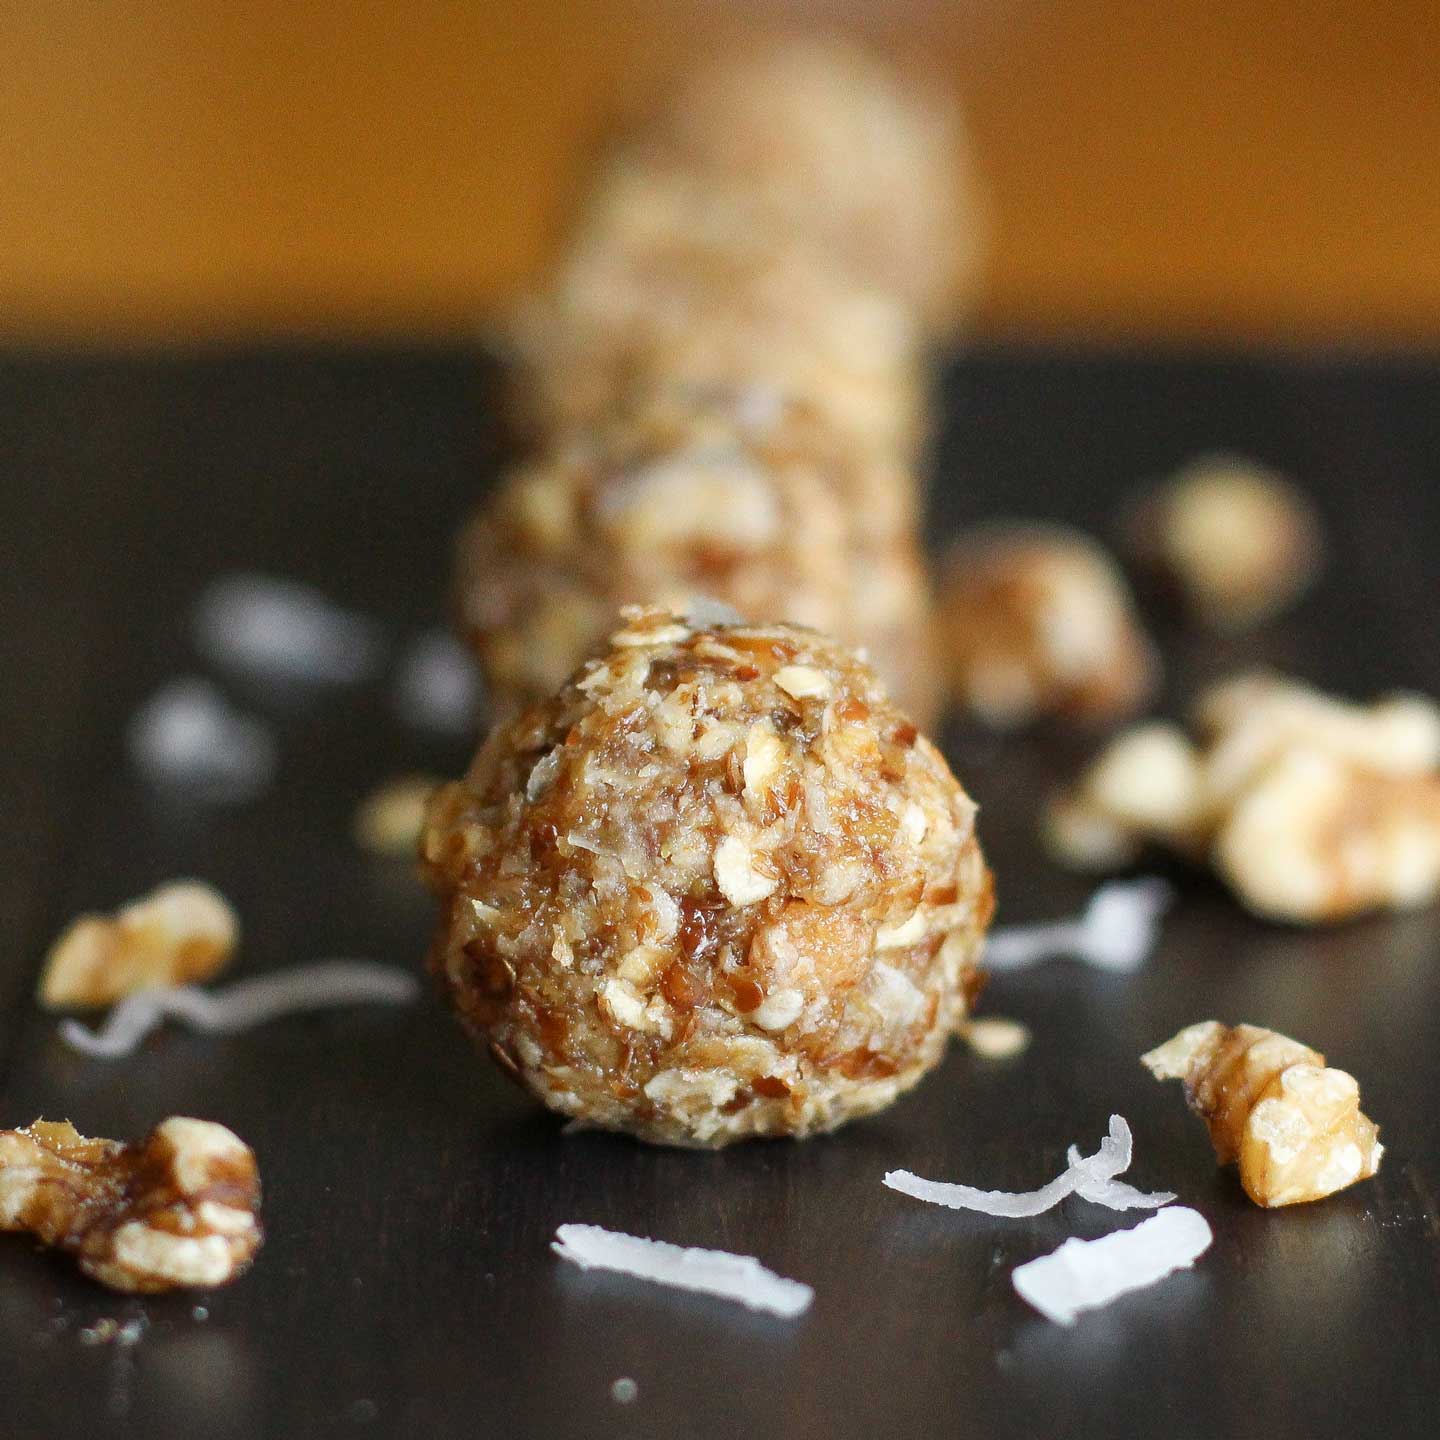 Closeup of the first ball in a row of 4 energy bites, laying on black wood with extra nuts and coconut sprinkled around.